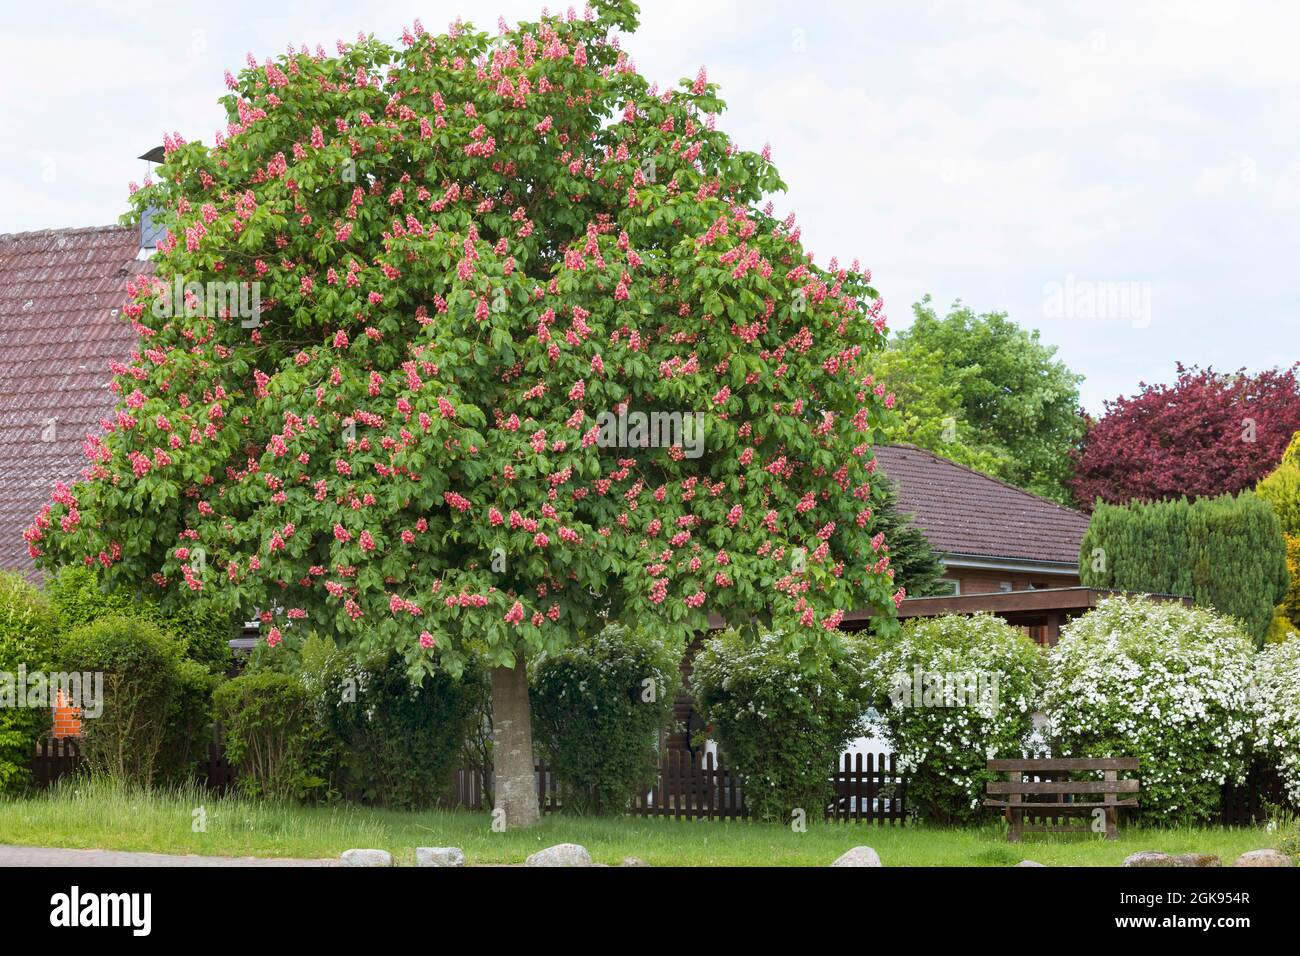 red horse chestnut, pink horse chestnut (Aesculus x carnea, Aesculus carnea), Blooming red horse chestnut, Germany Stock Photo